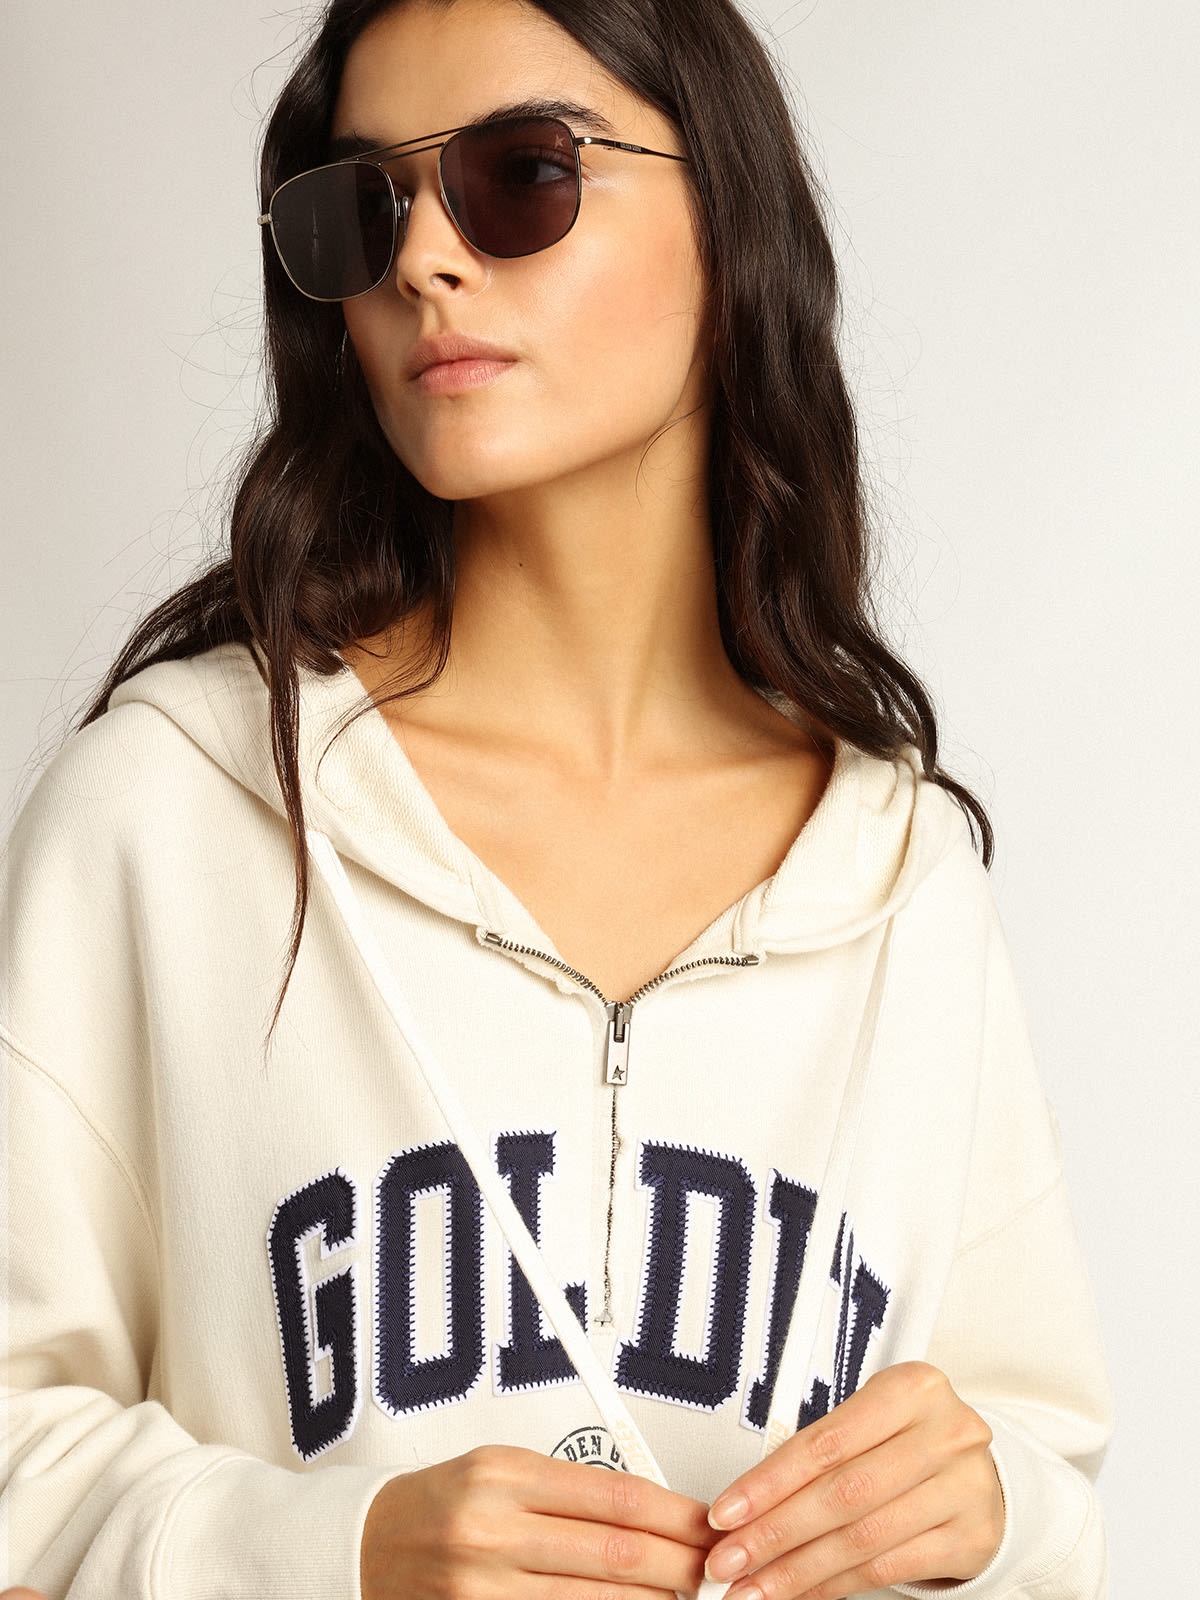 White sweatshirt dress with hood and Golden patch - 3